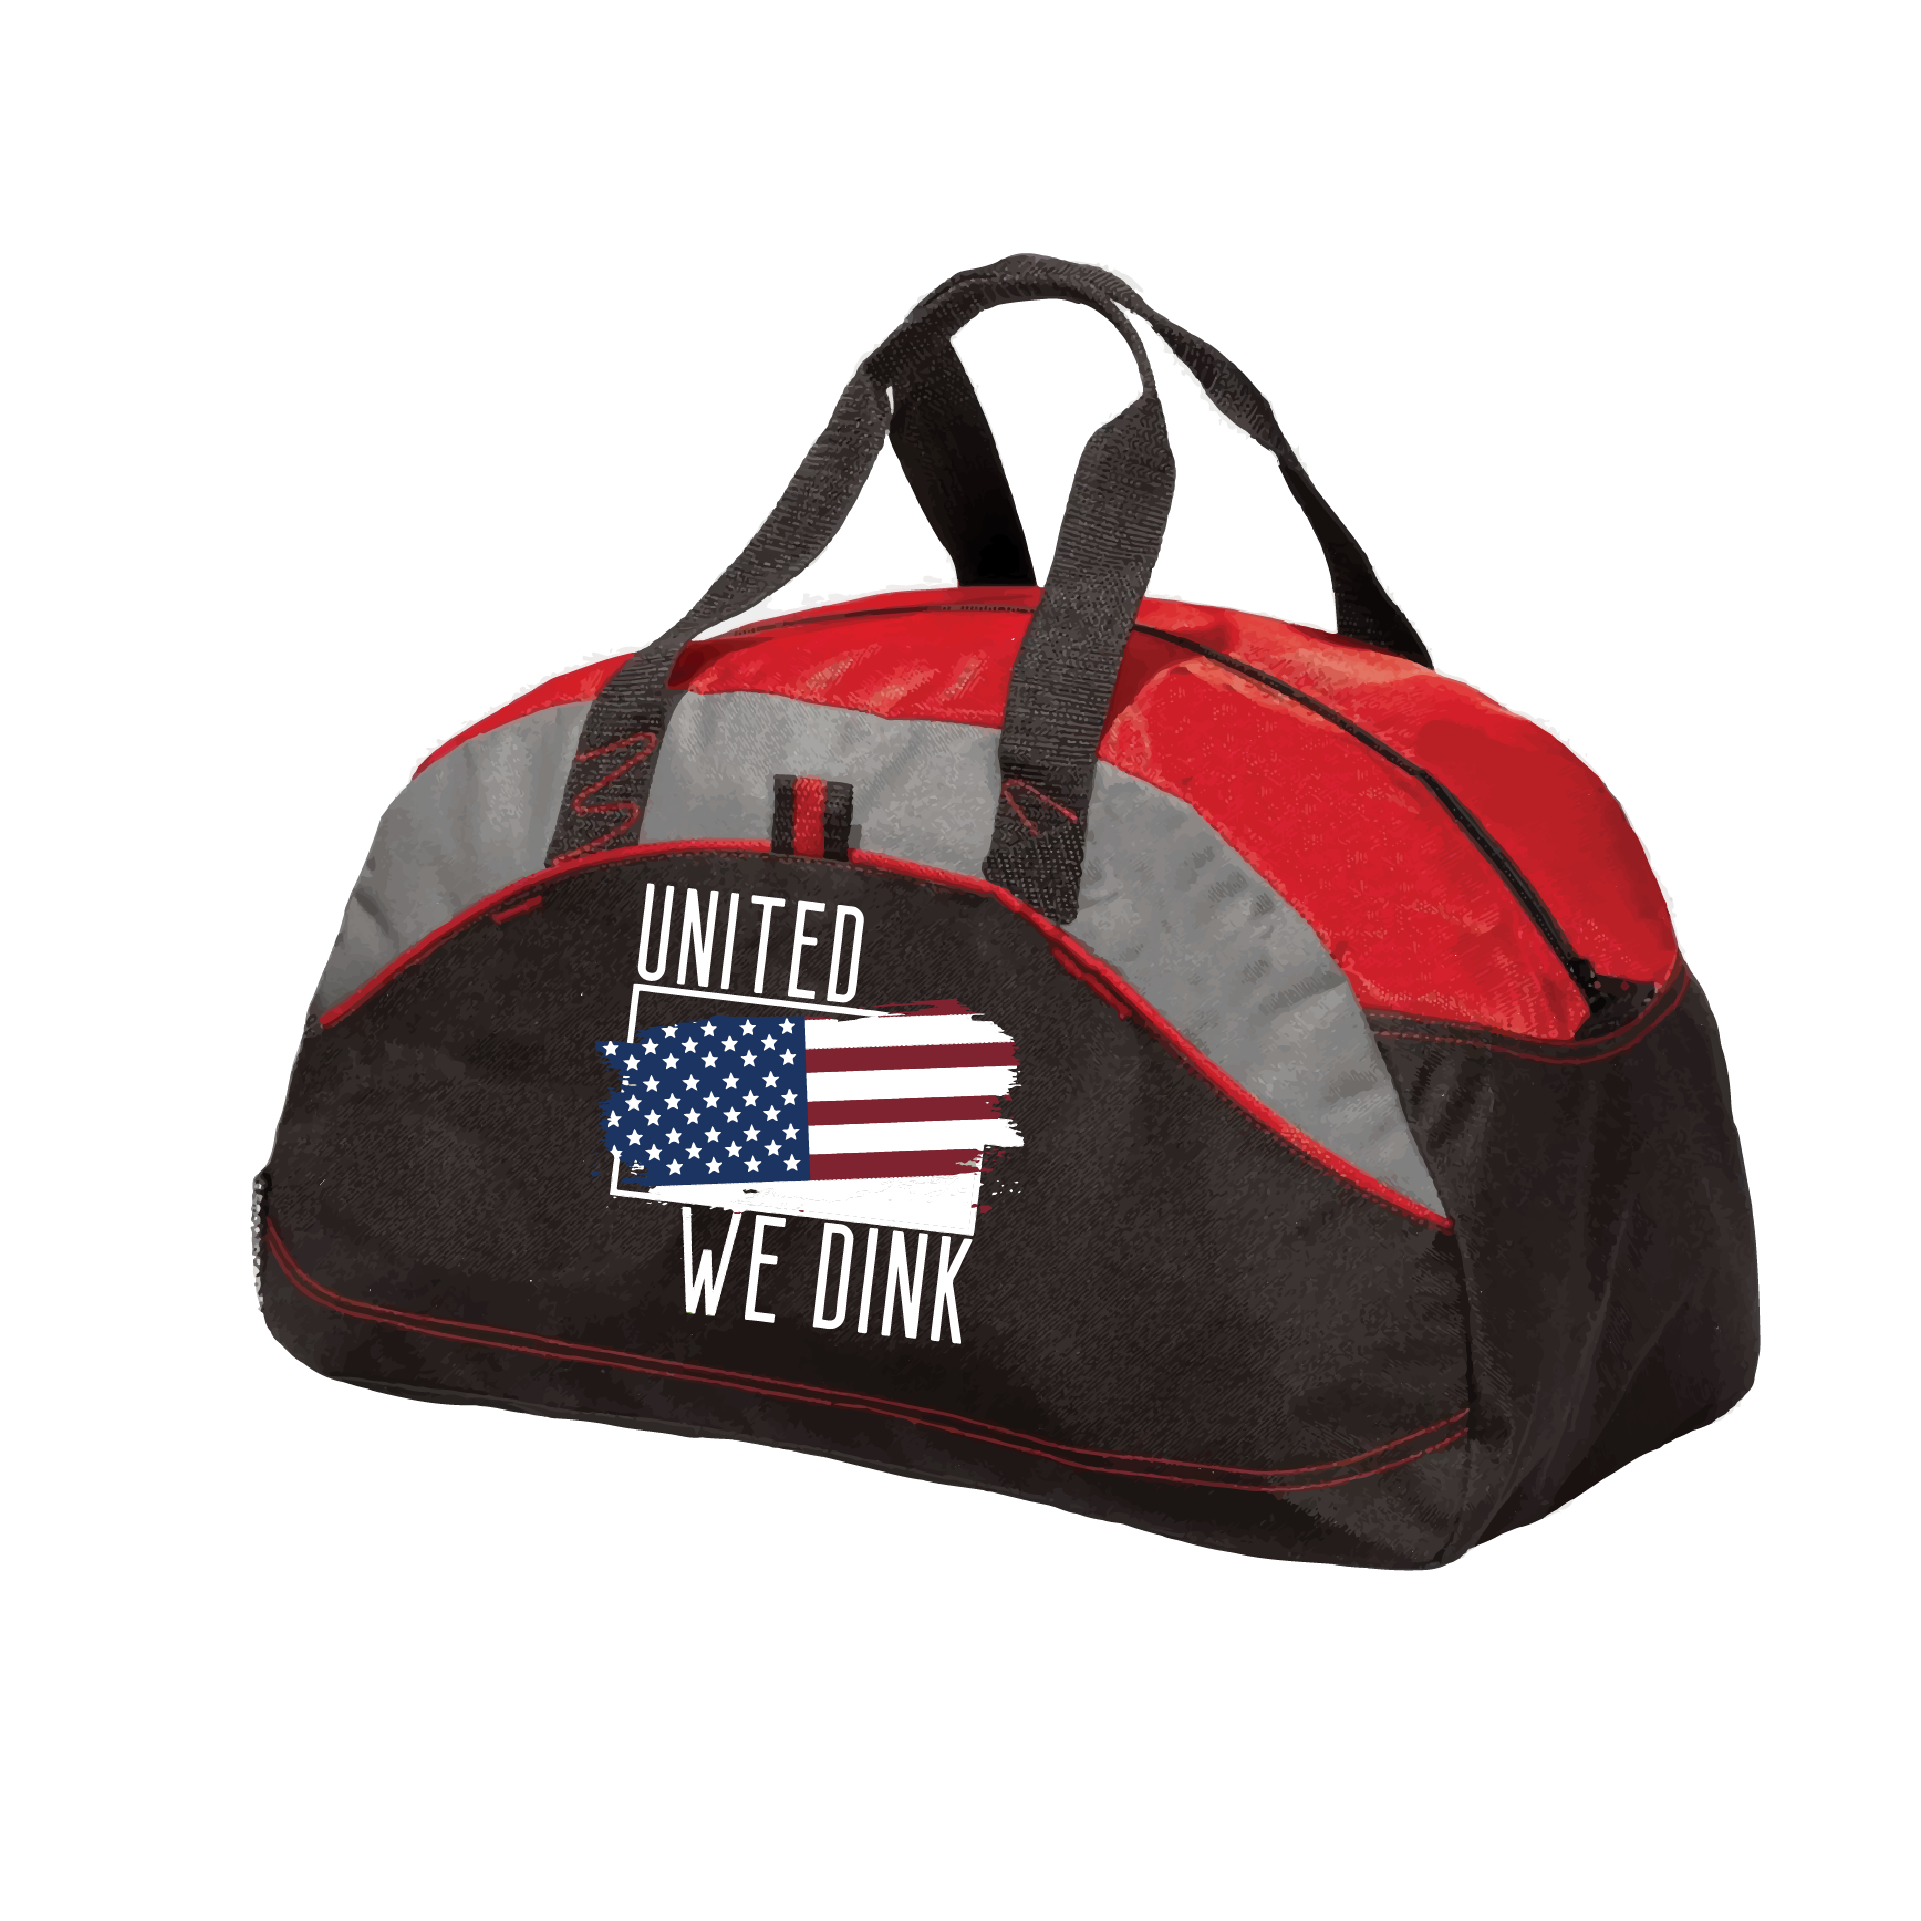 Pickleball Duffel Bag Design: United We Dink  Carry your gear in comfort and style. This fun pickleball duffel bag is the perfect accessory for all pickleball players needing to keep their gear in one place. This medium sized duffel tote is ideal for all your pickleball activities. The large center compartment allows for plenty of space and the mesh end pocket is perfect for holding a water bottle.